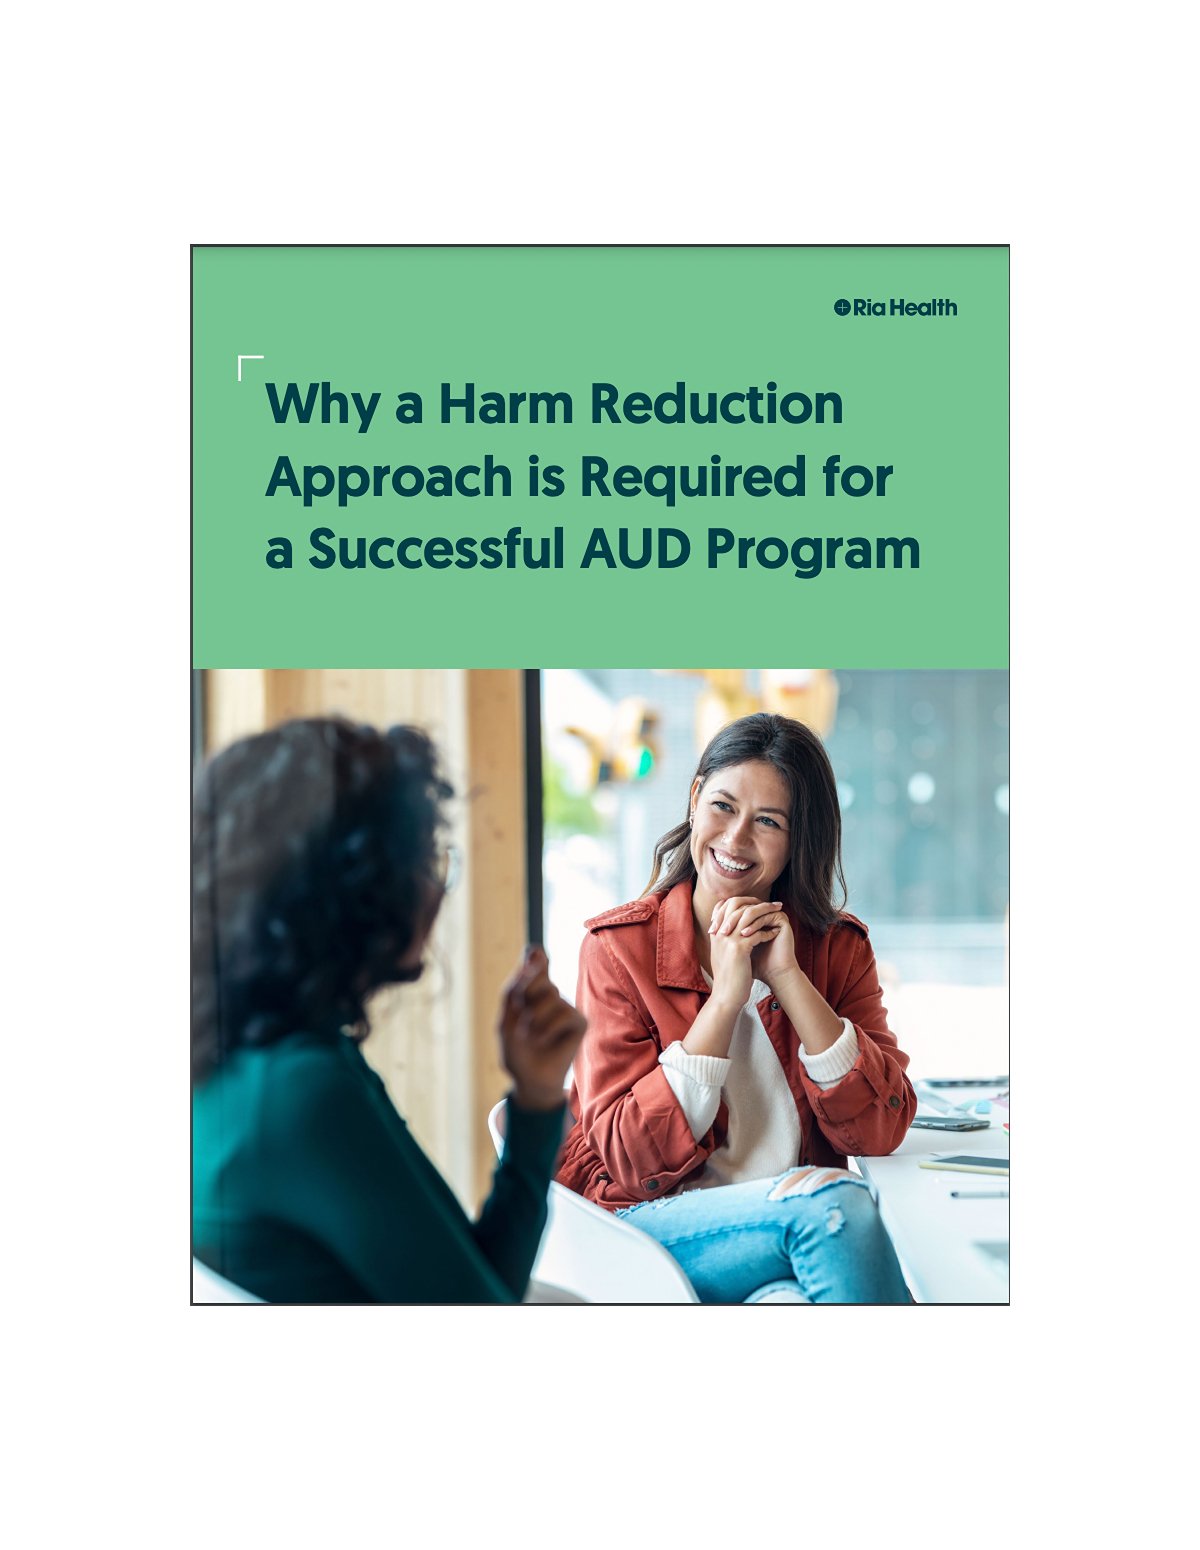 Why a Harm Reduction Approach is Required for a Successful AUD Program